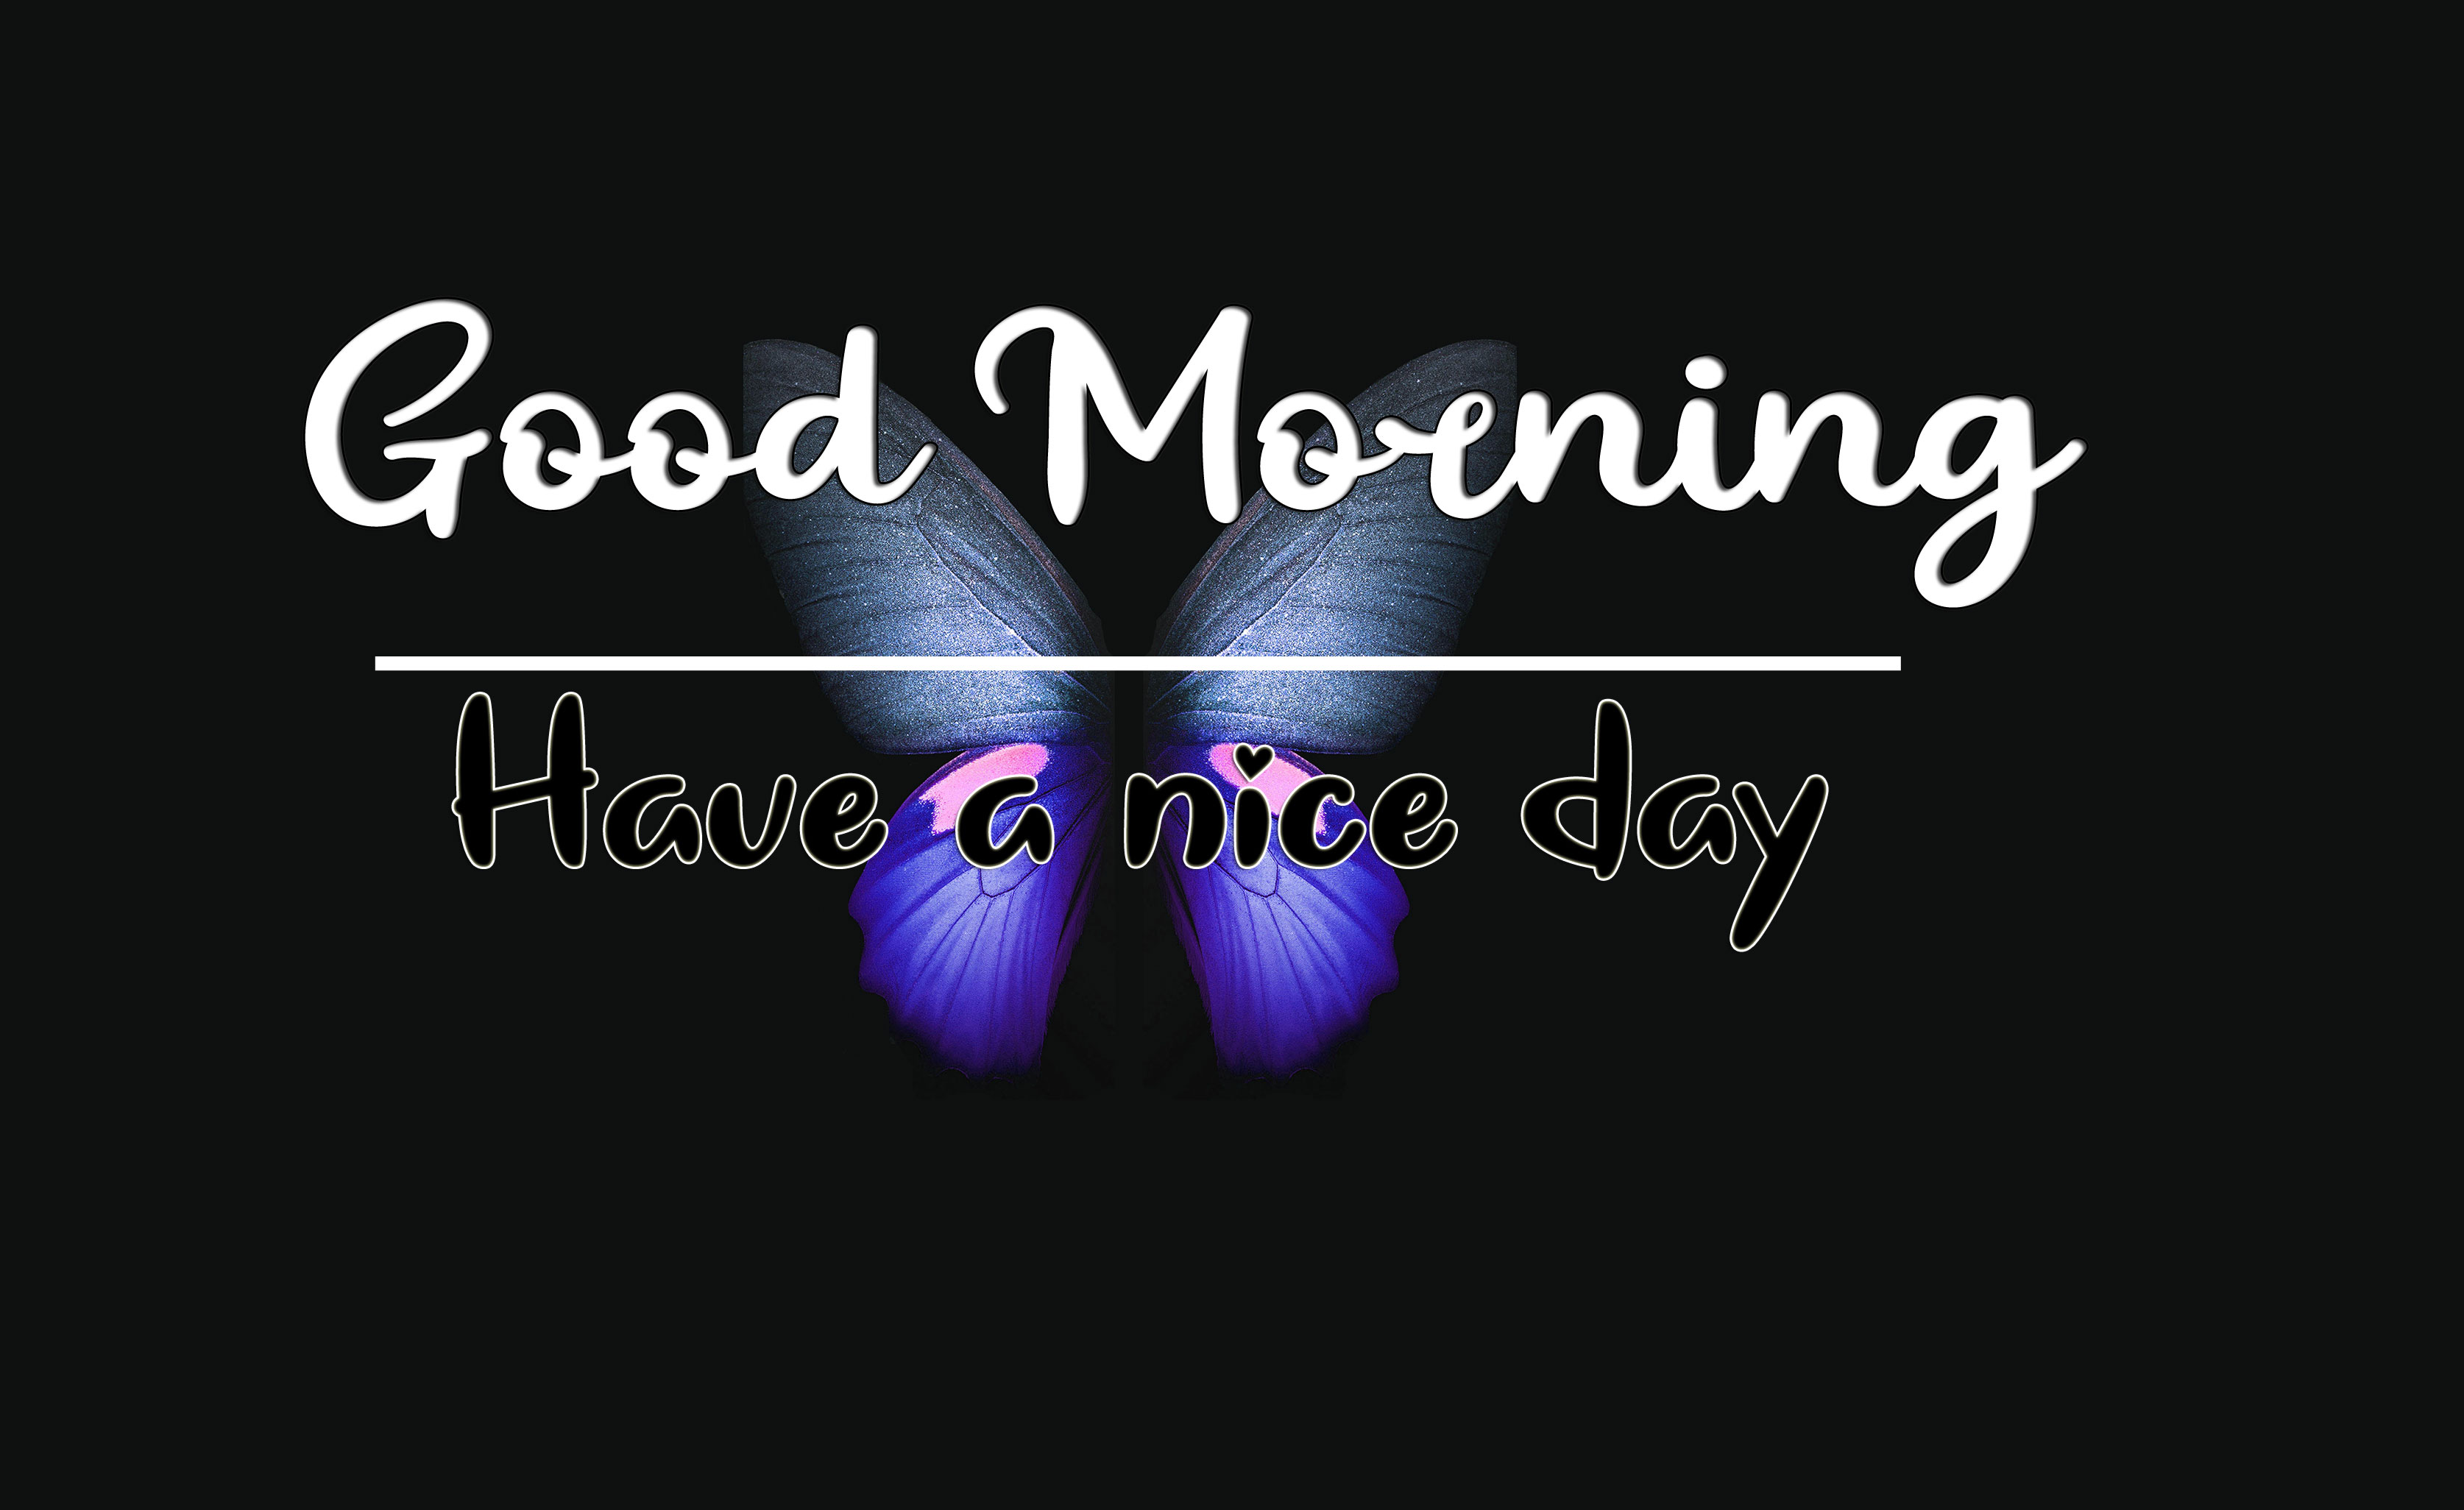 Good Morning Wishes Images HD 1080p 10